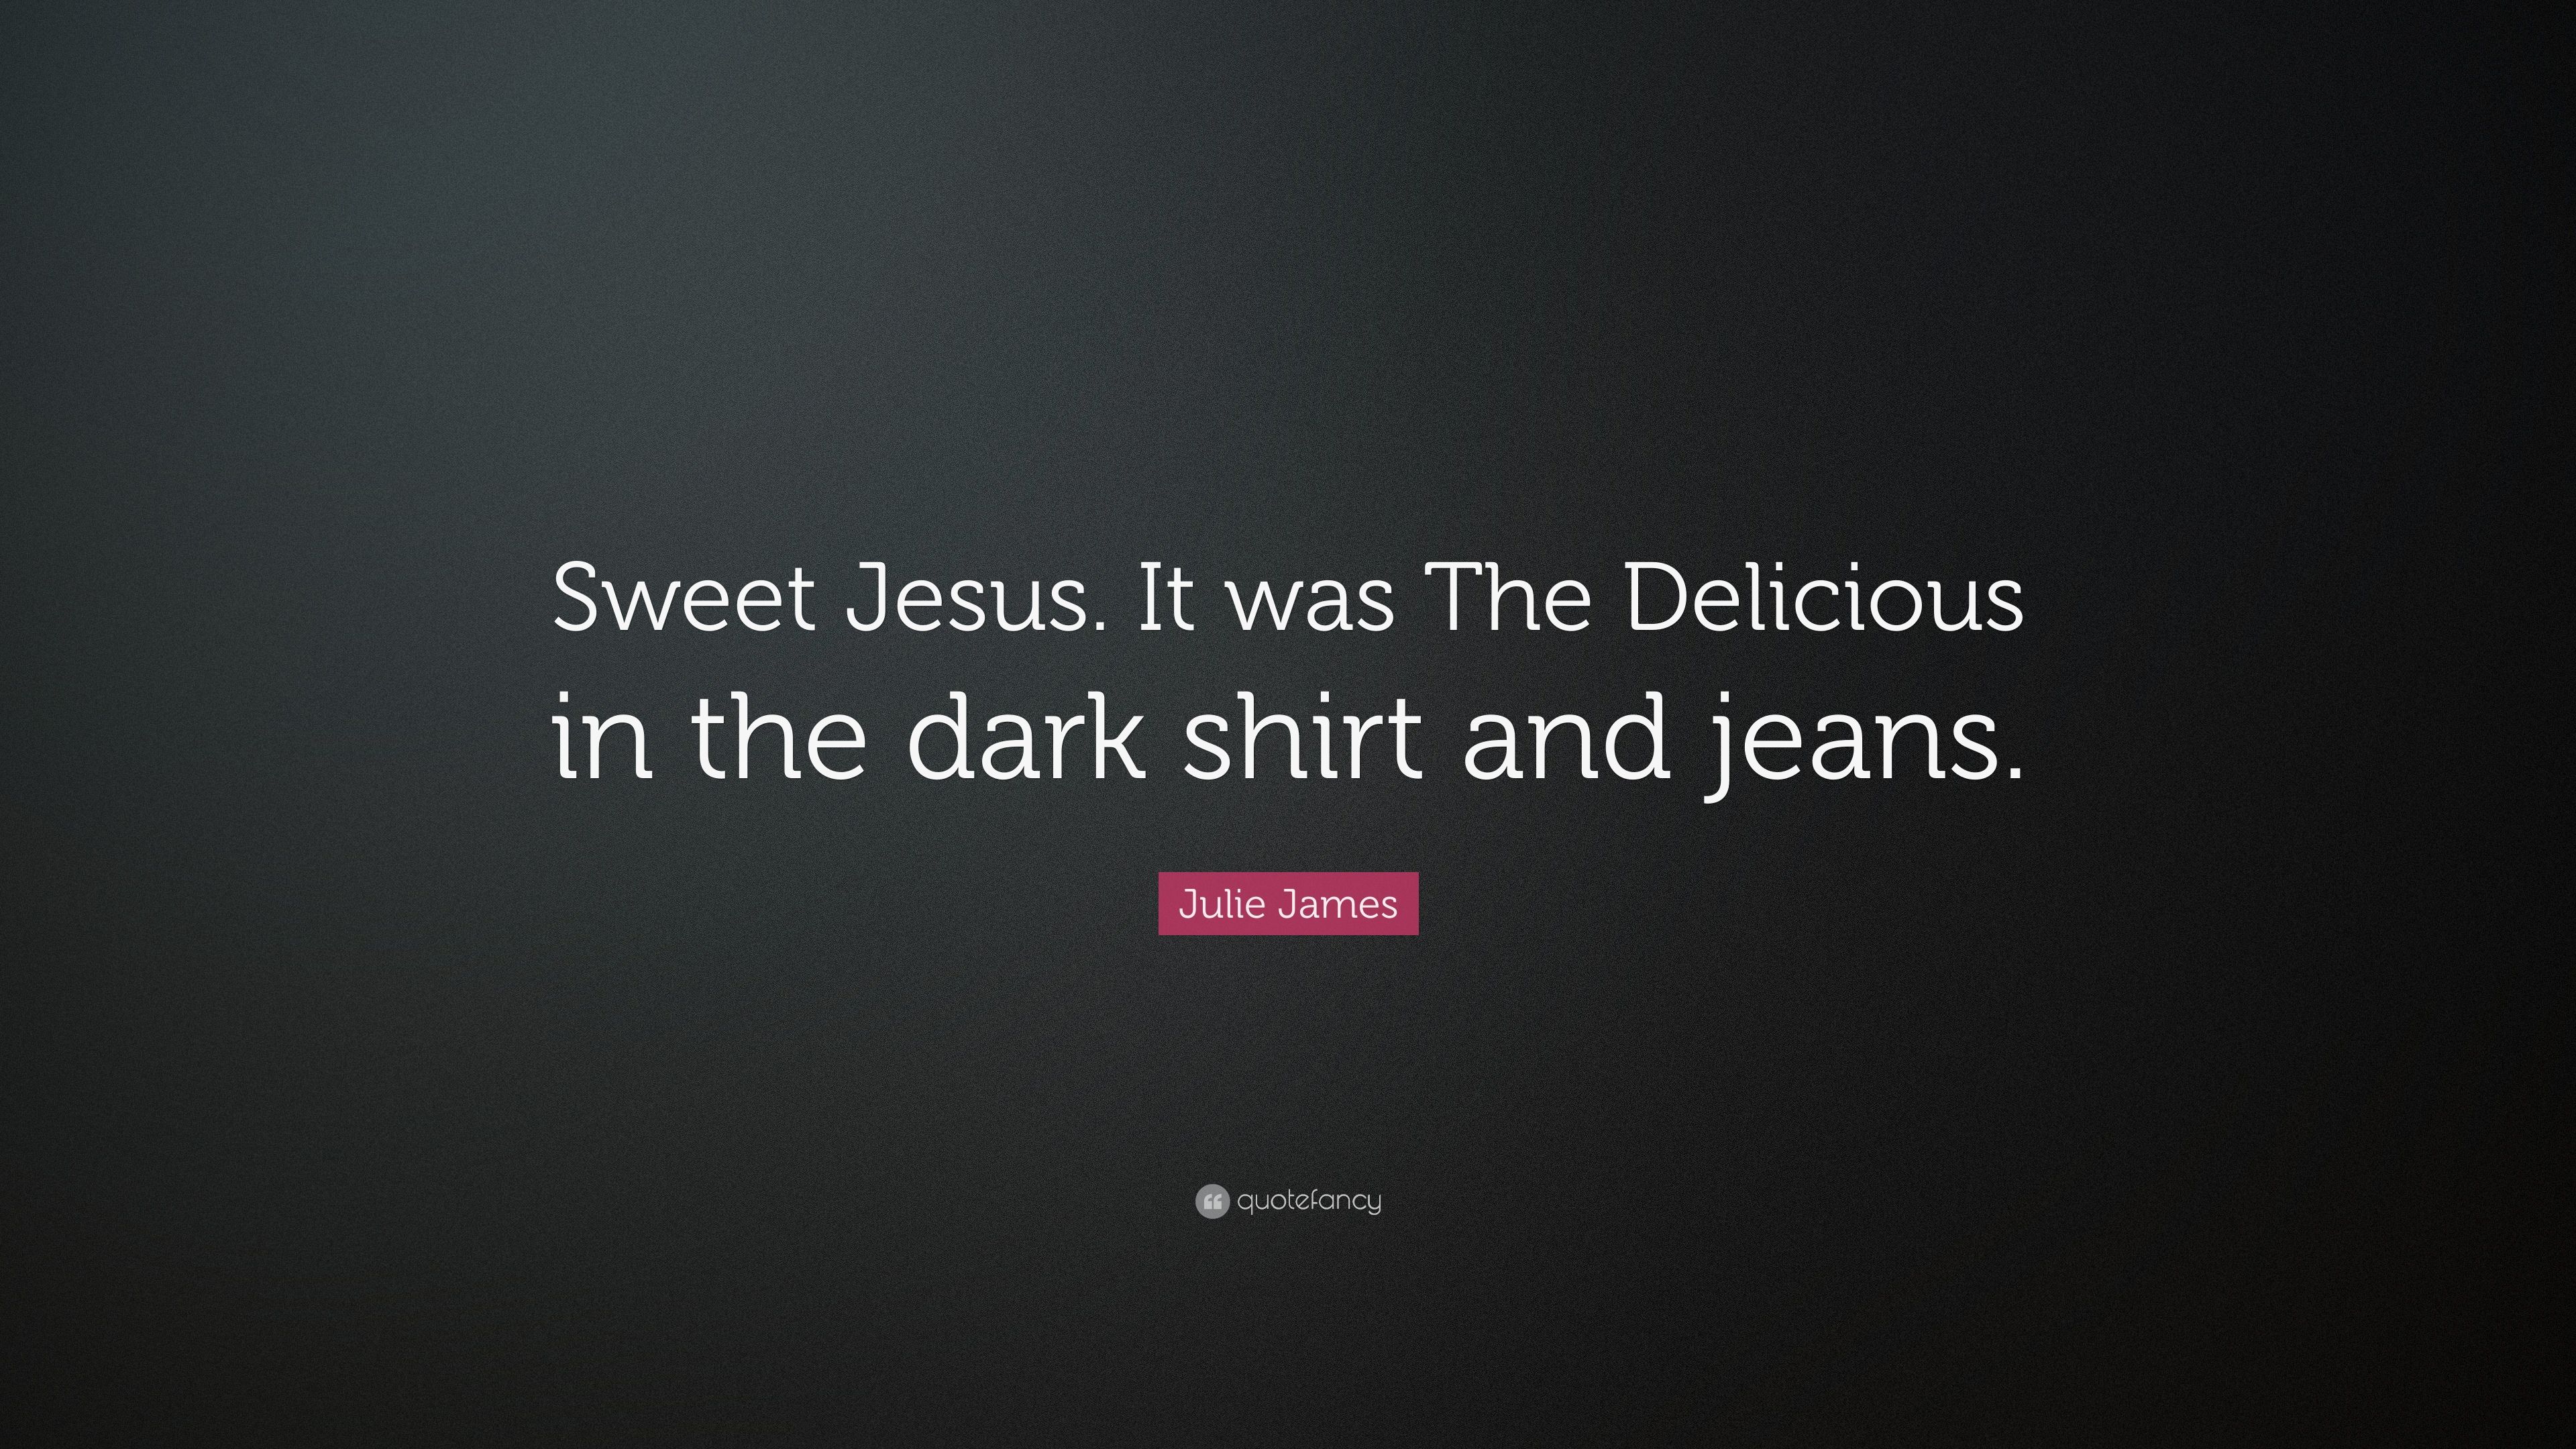 Julie James Quote: “Sweet Jesus. It was The Delicious in the dark